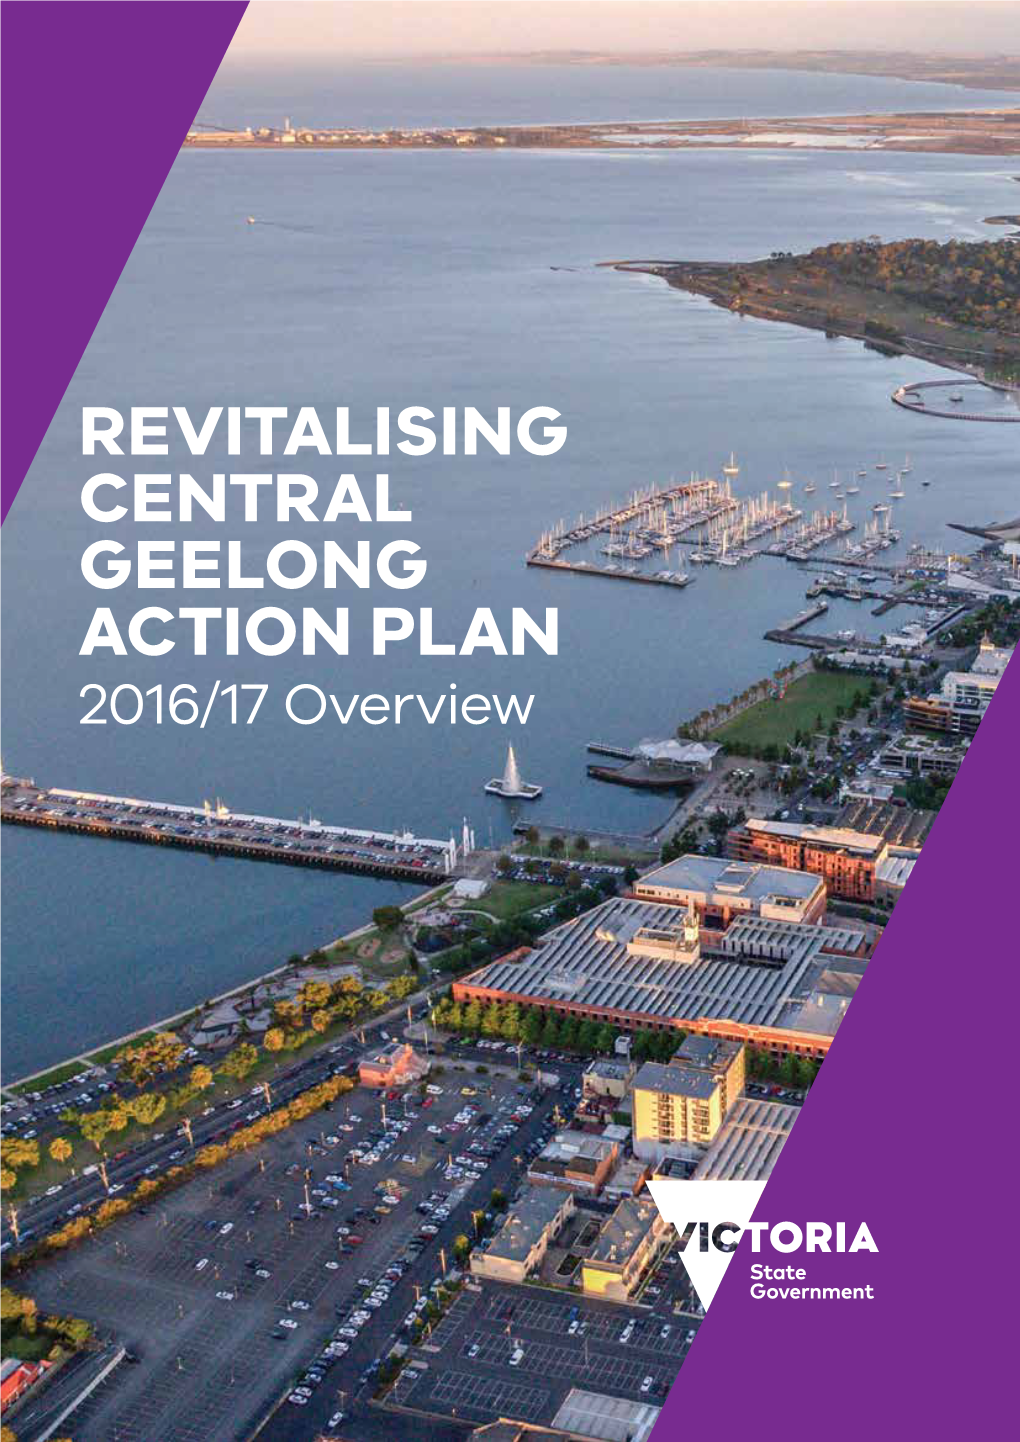 Revitalising Central Geelong Action Plan 2016/17 Overview